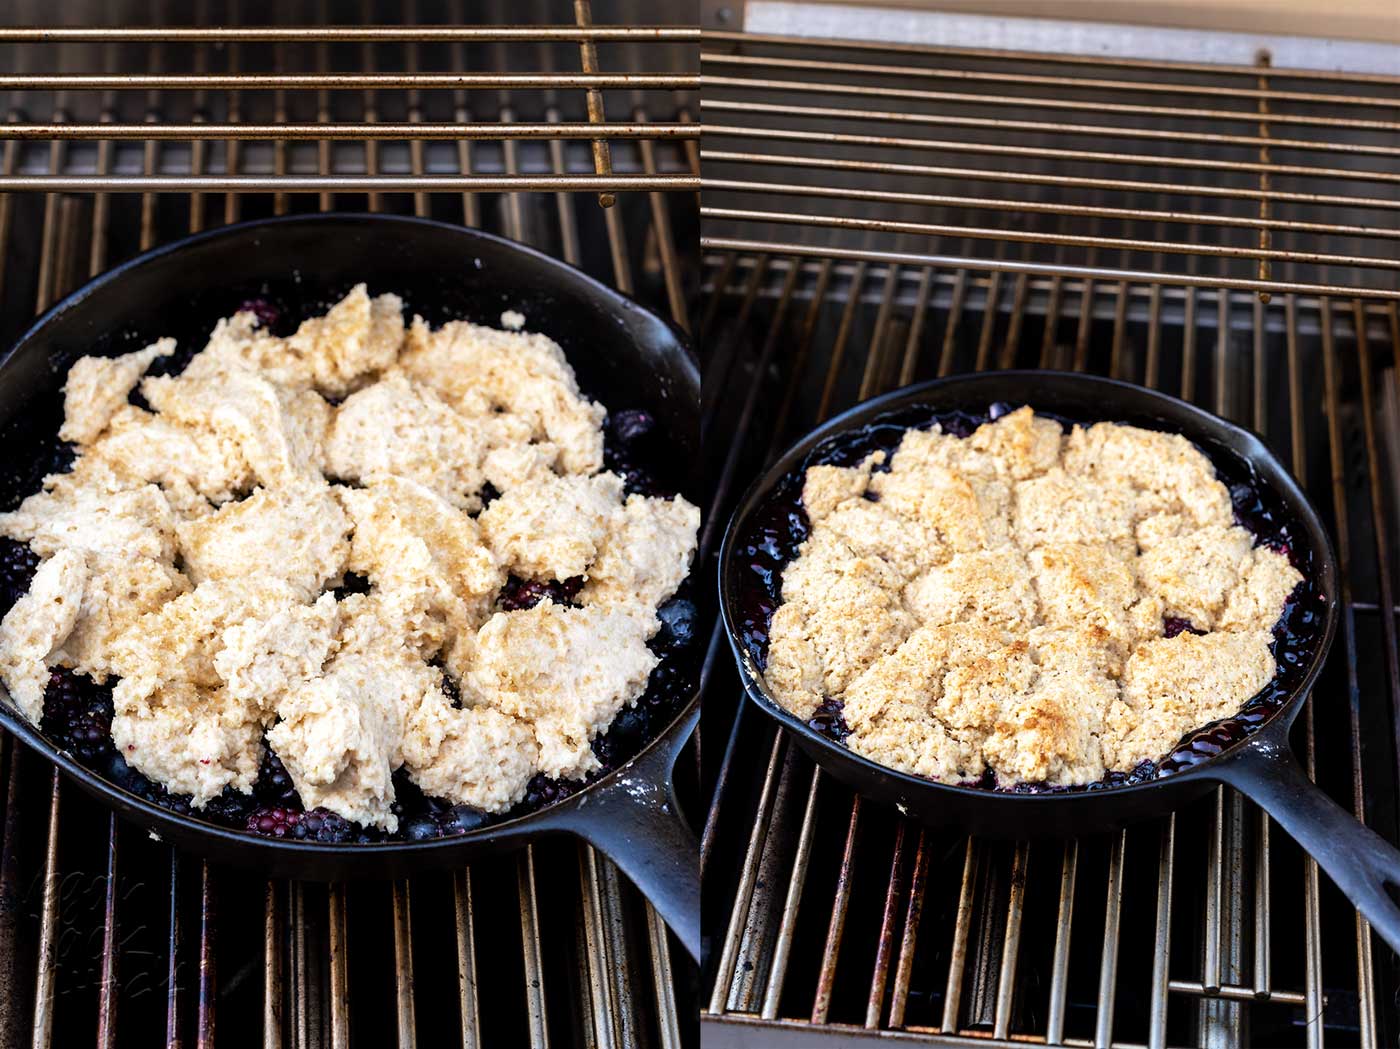 Cobbler in skillet on grill, before and after cooking.